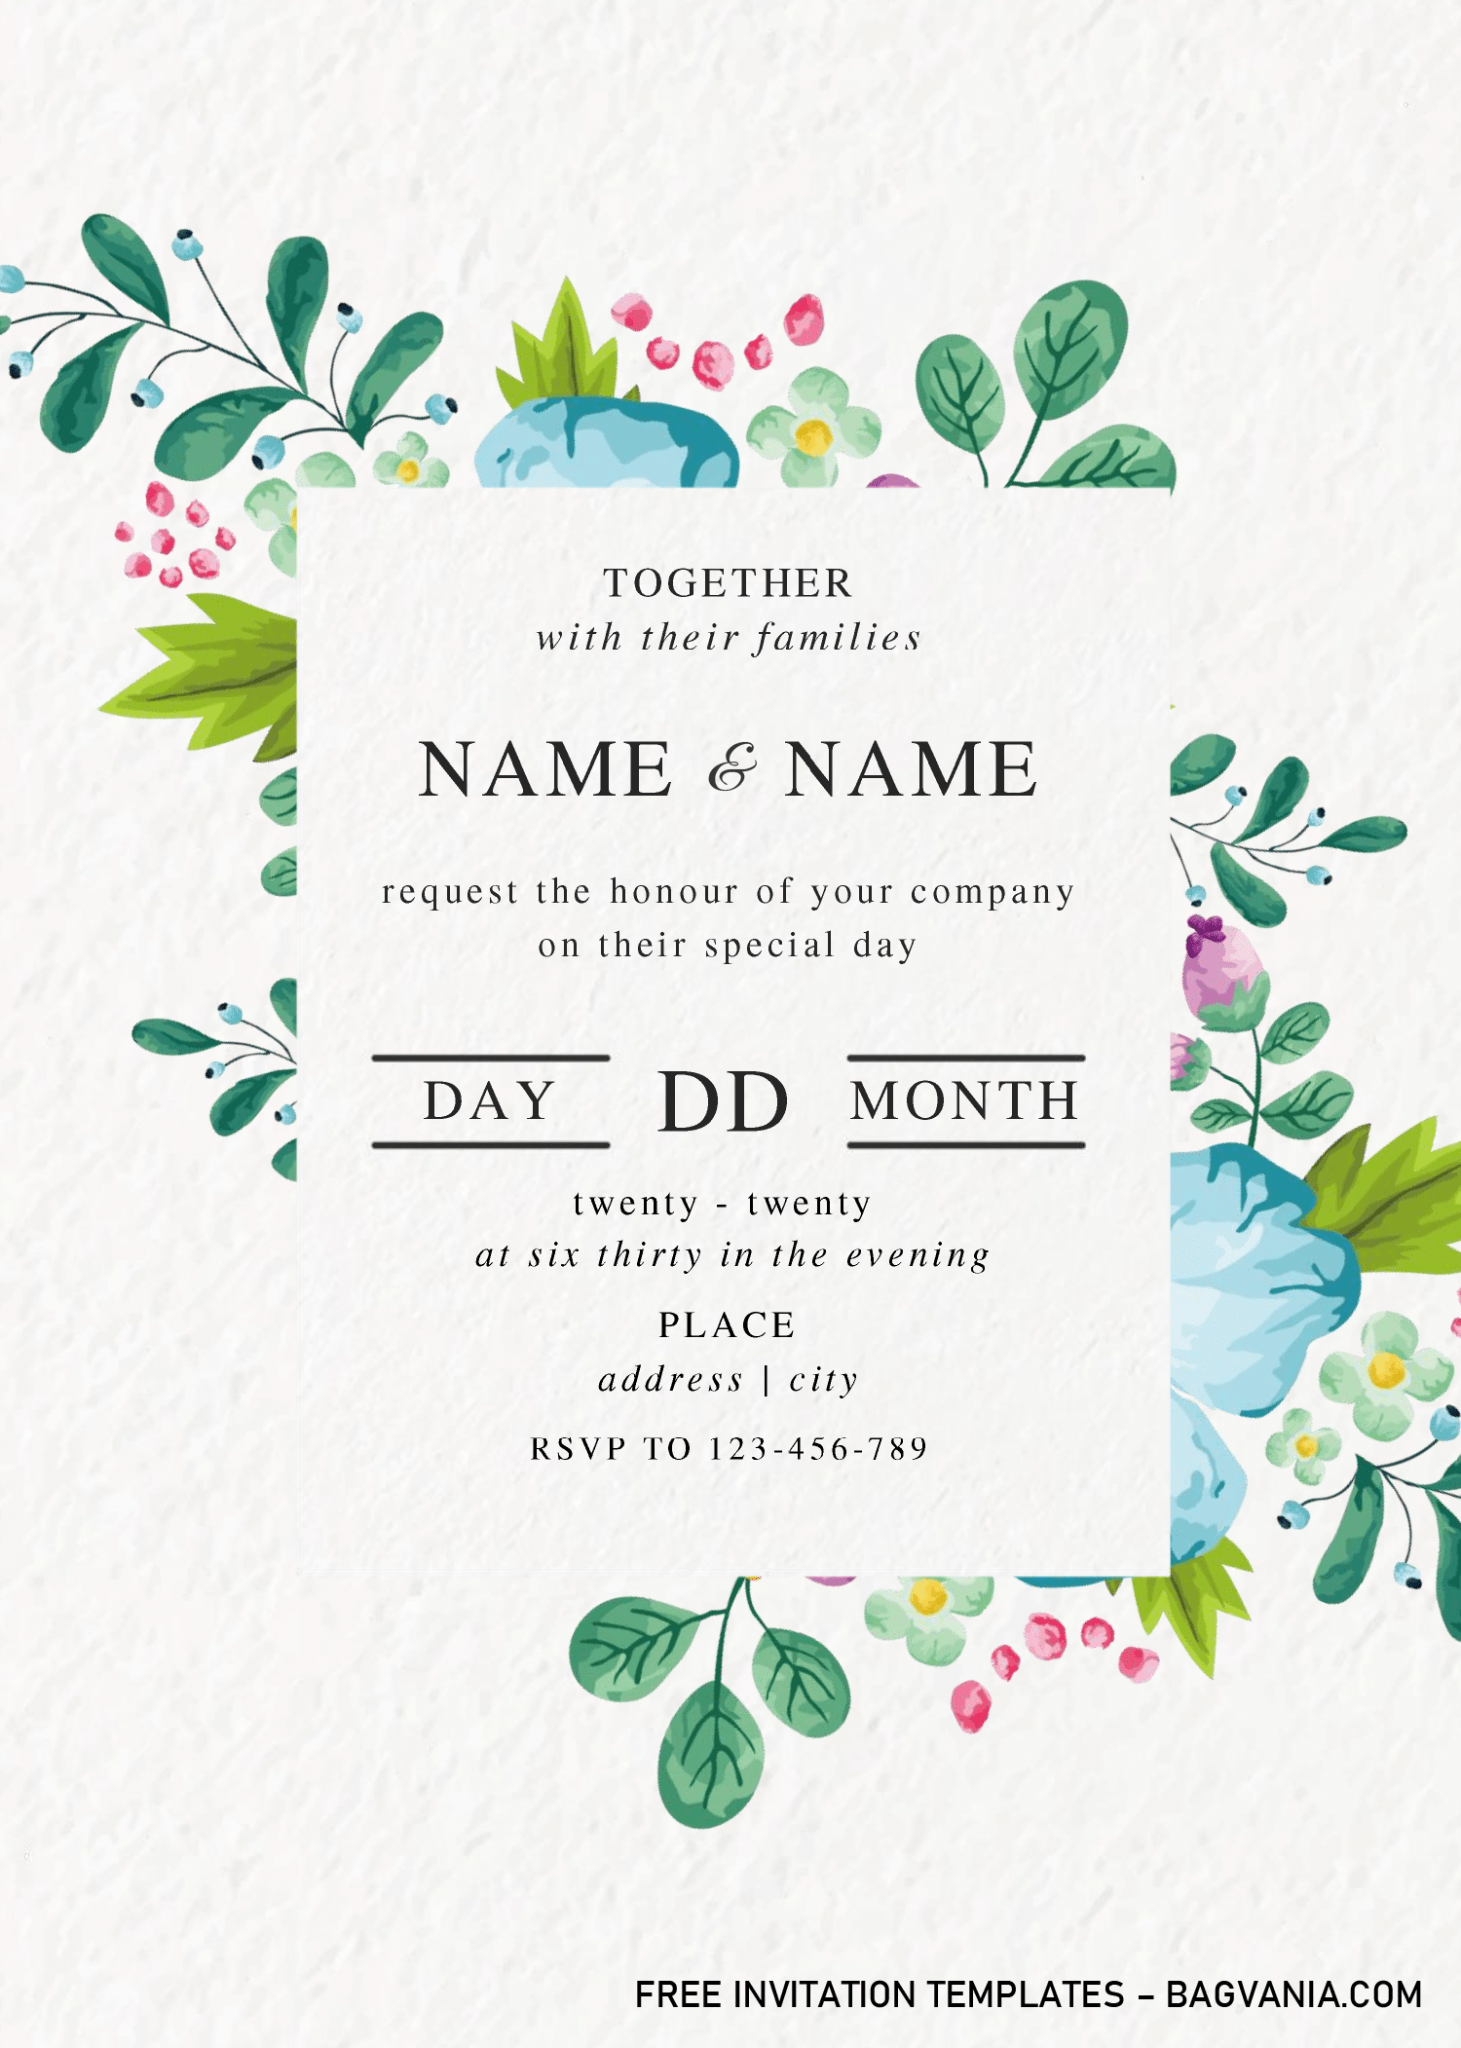 Modern Floral Invitation Templates – Editable With MS Word | FREE ...